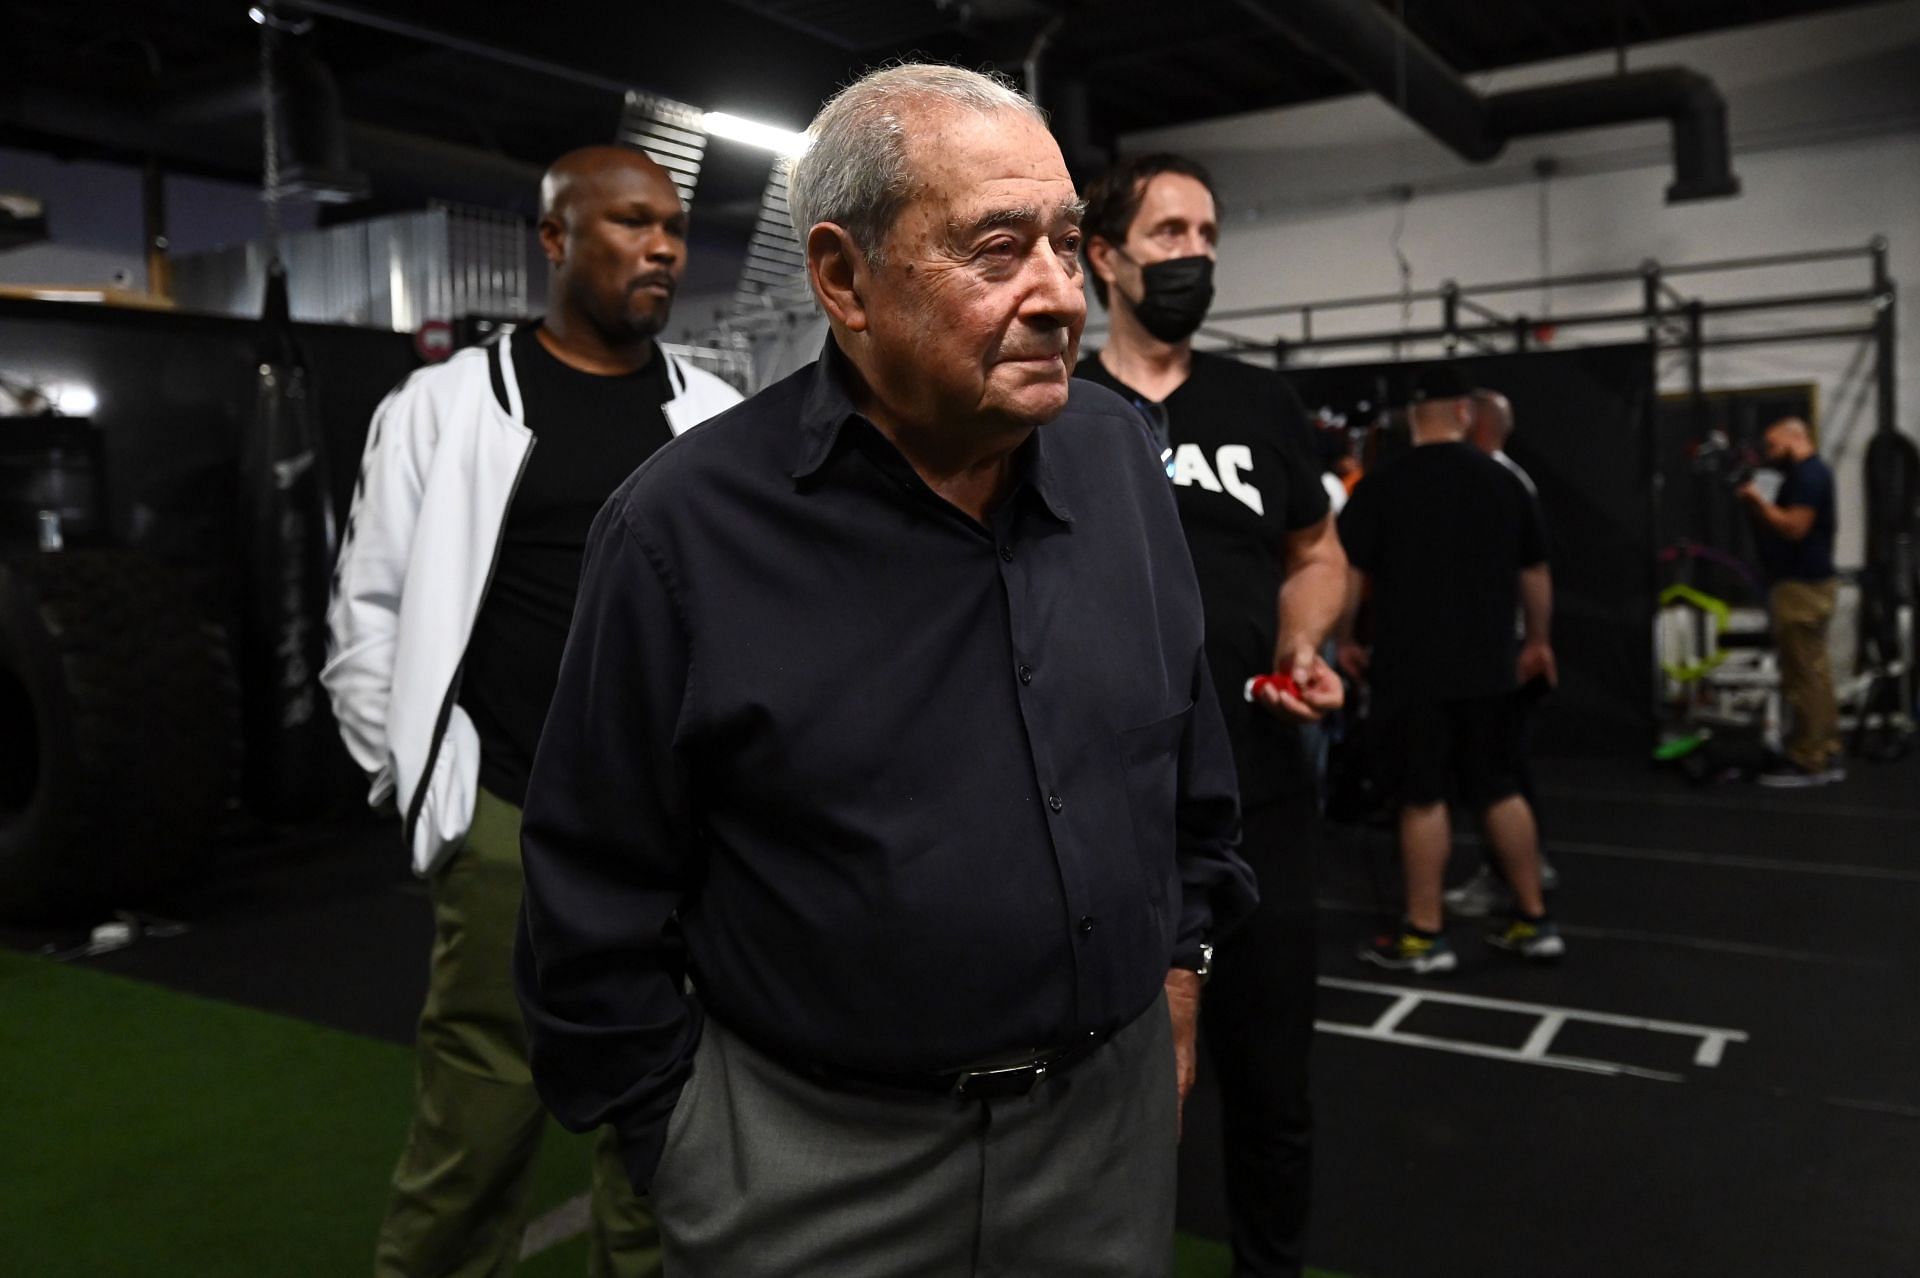 Bob Arum says Madison quare Garden will always be special for him